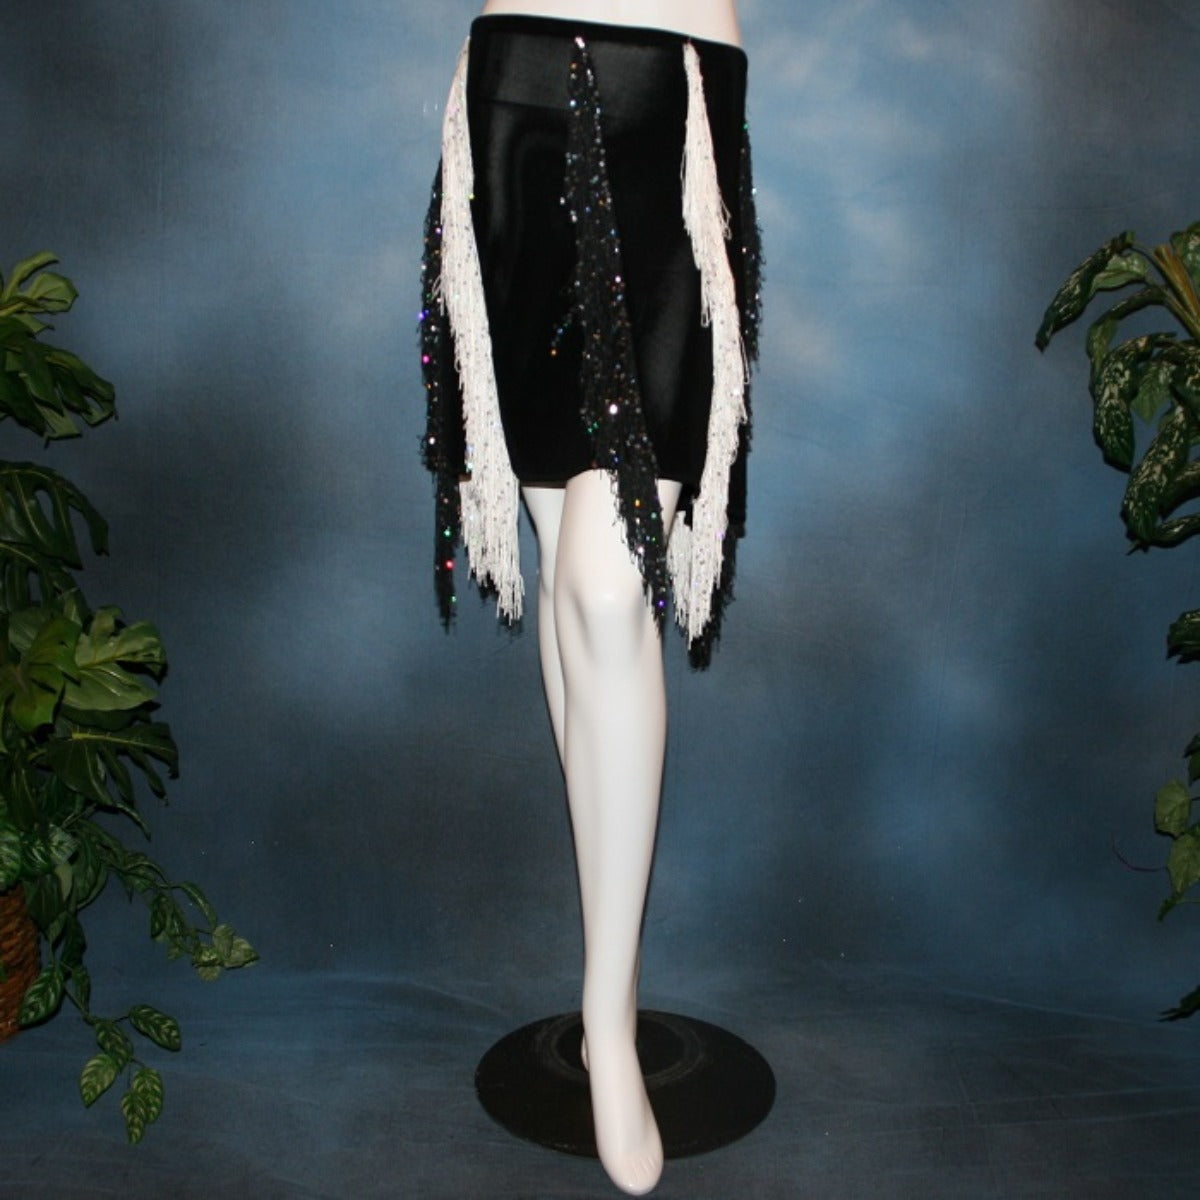 Crystal's Creations Black & white Latin/rhythm skirt created of luxurious black solid slinky with vertical rows of black & white hologram sequined fringe, would pair greatly with a simple black bodysuit....or a custom created bodysuit or two would be fabulous for versatility, one on the simple classic side & one fabulously ornate with Swarovski rhinestone work!   